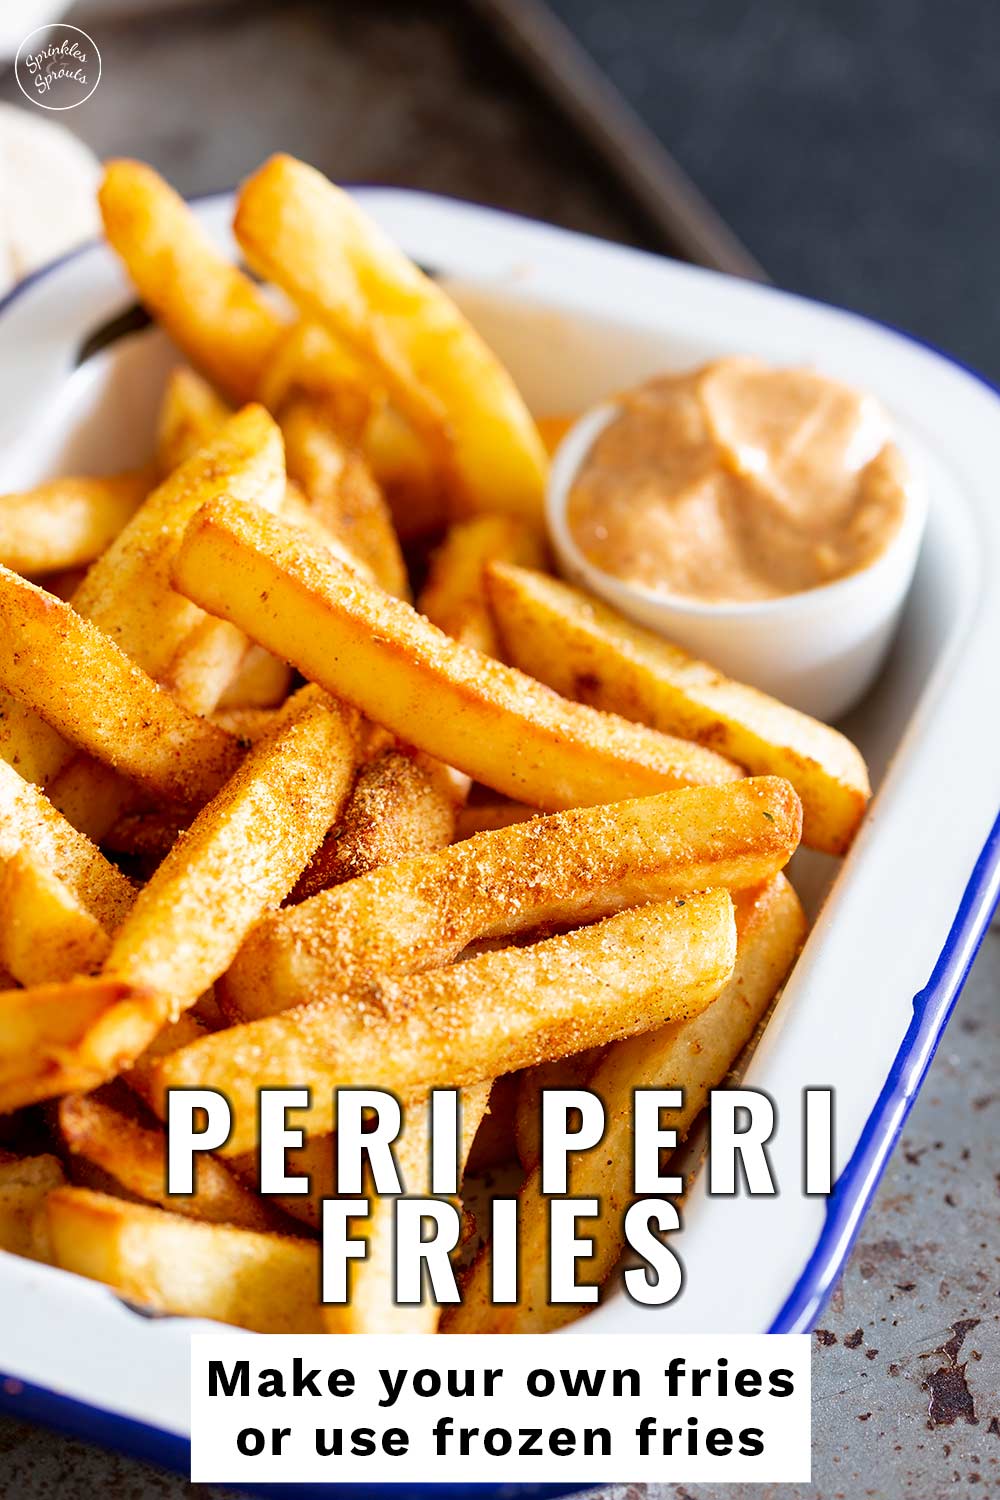 PINTEREST IMAGE - Peri peri fries with text overlay